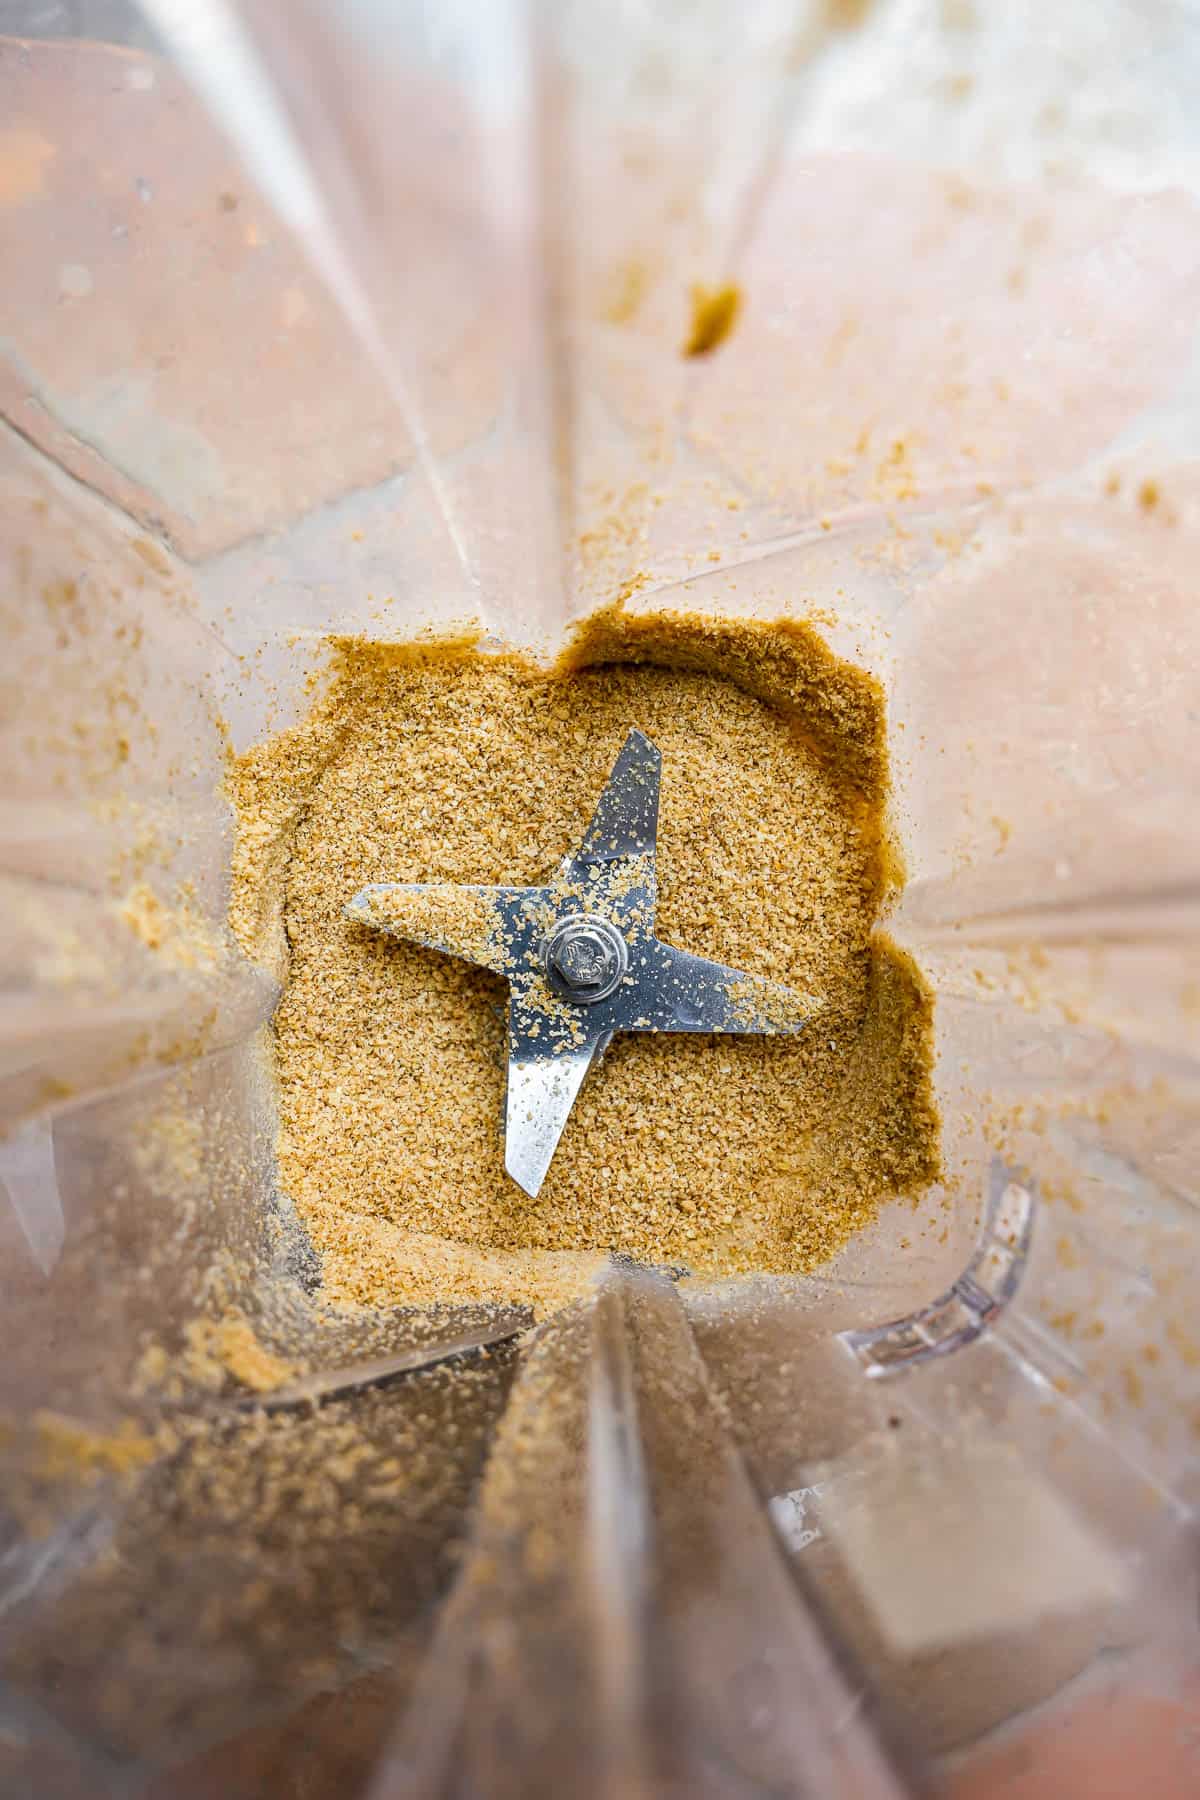 Sesame seeds are ground into a coarse meal in a blender.